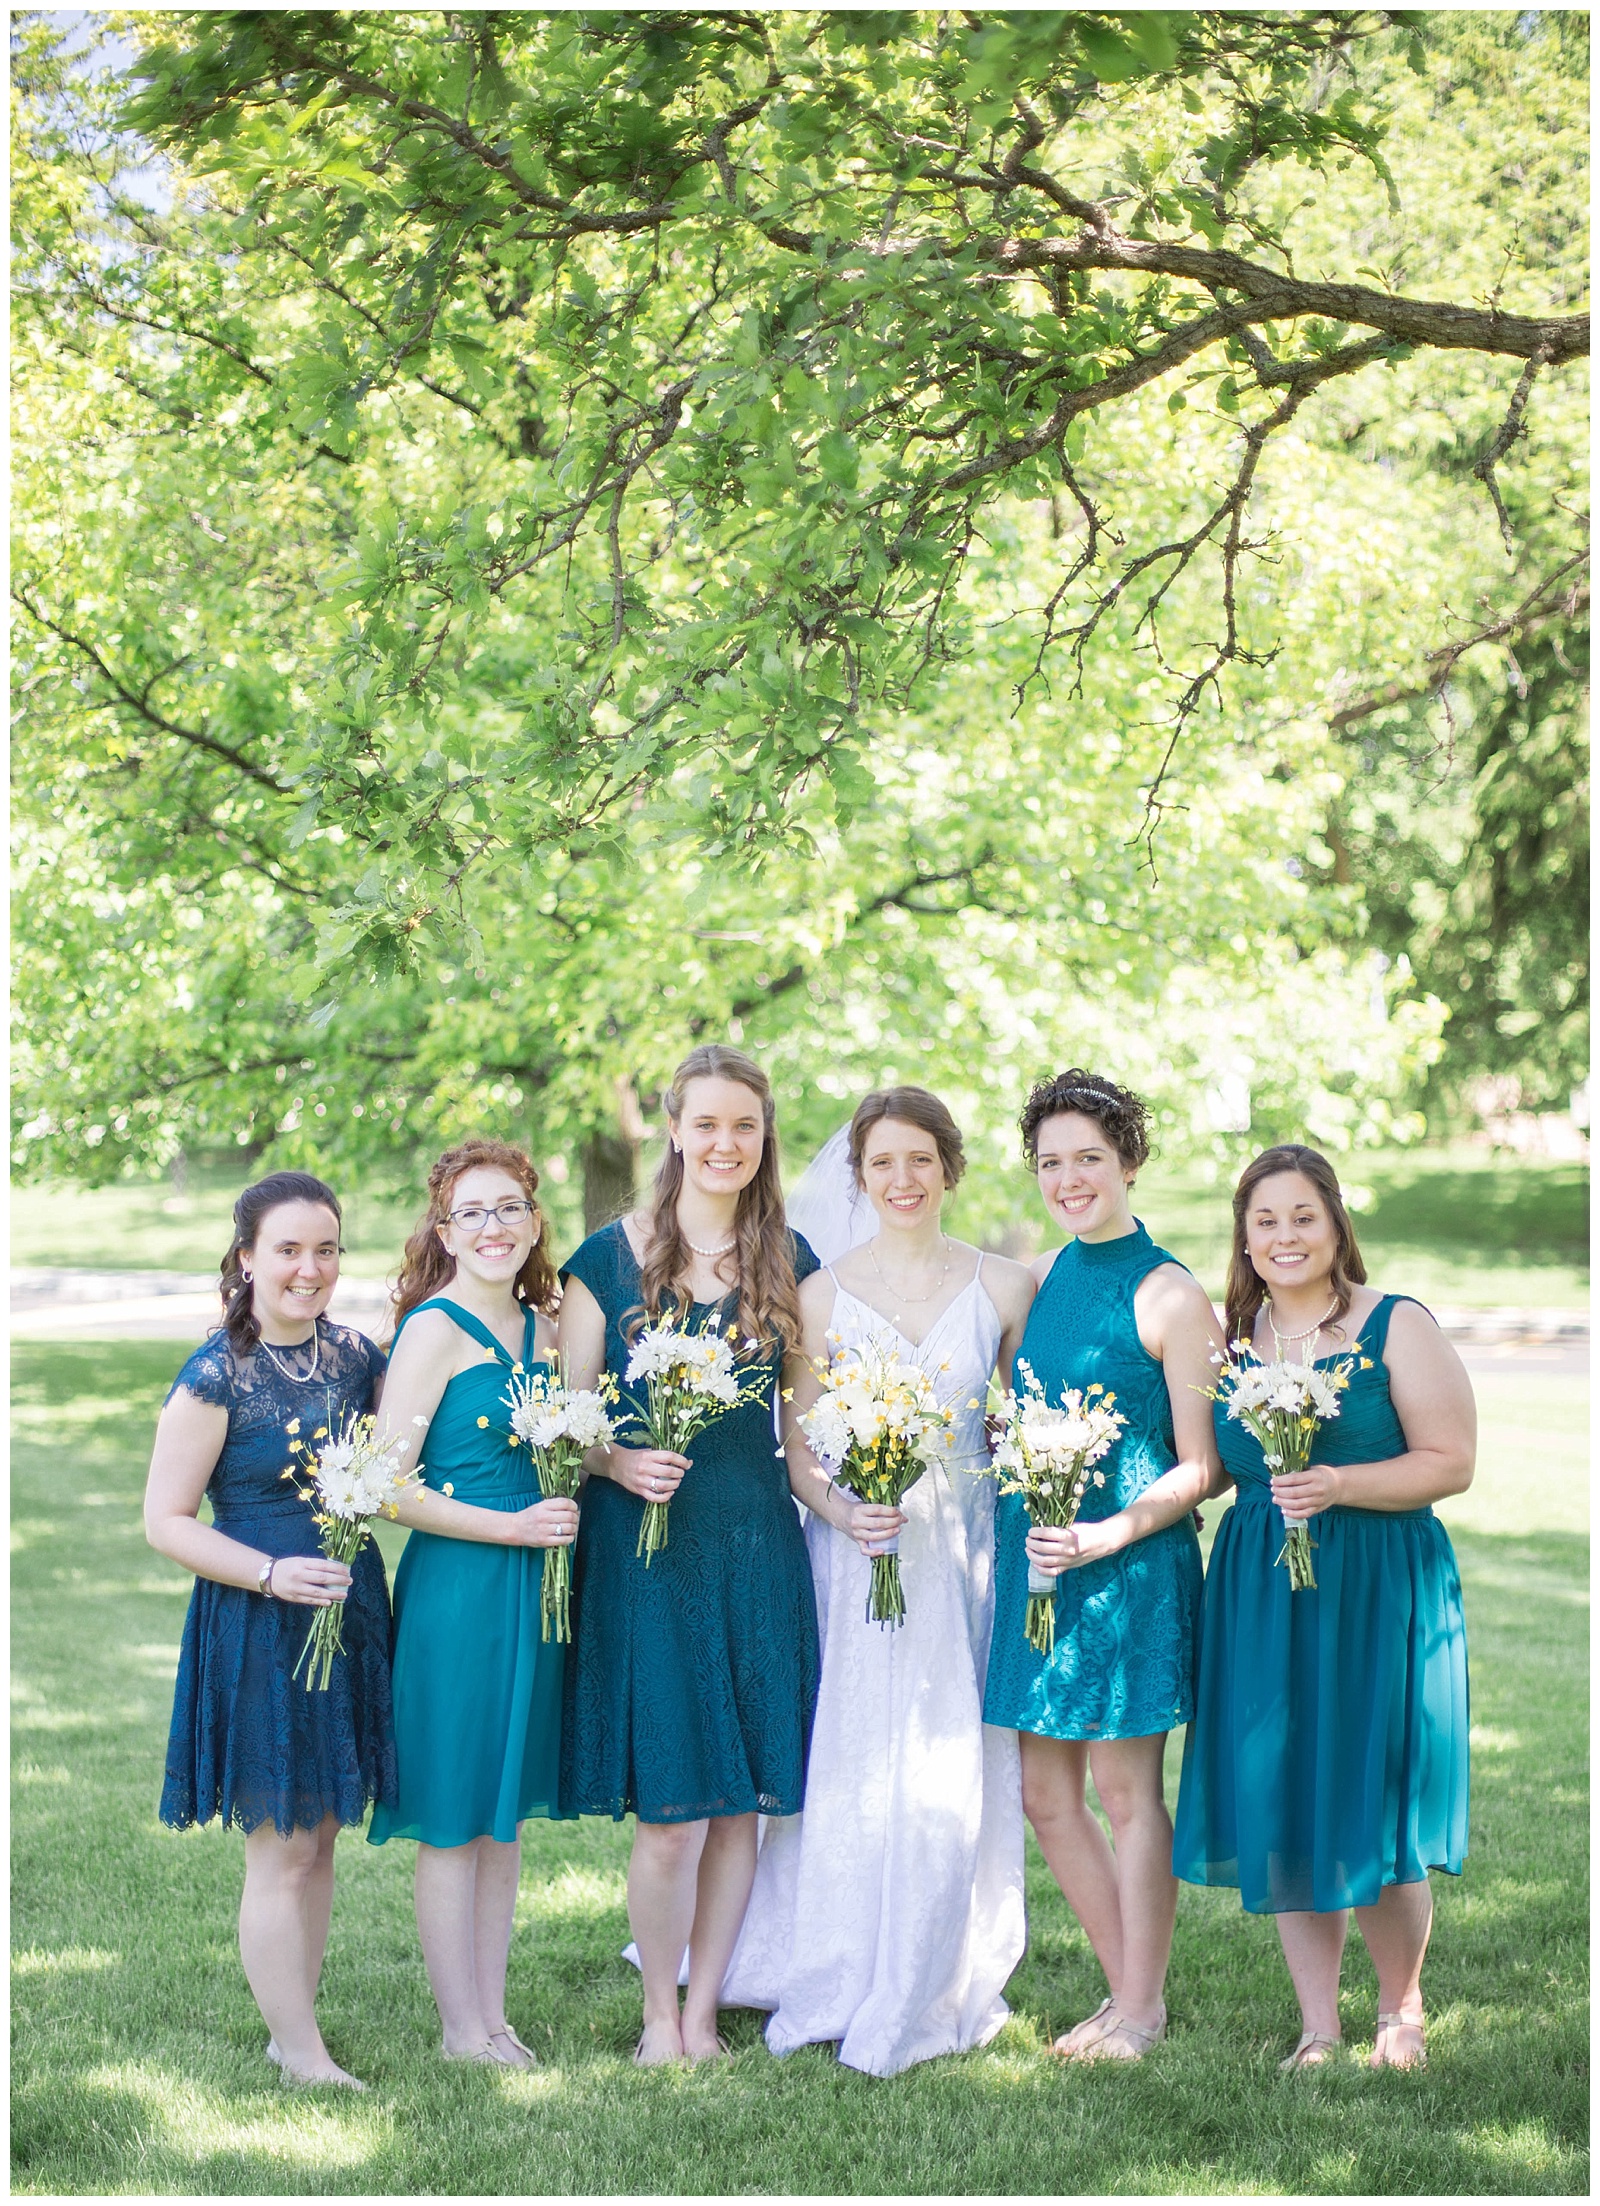 How to Choose your Wedding Party | Monica Brown Photography | monicabrownphoto.com